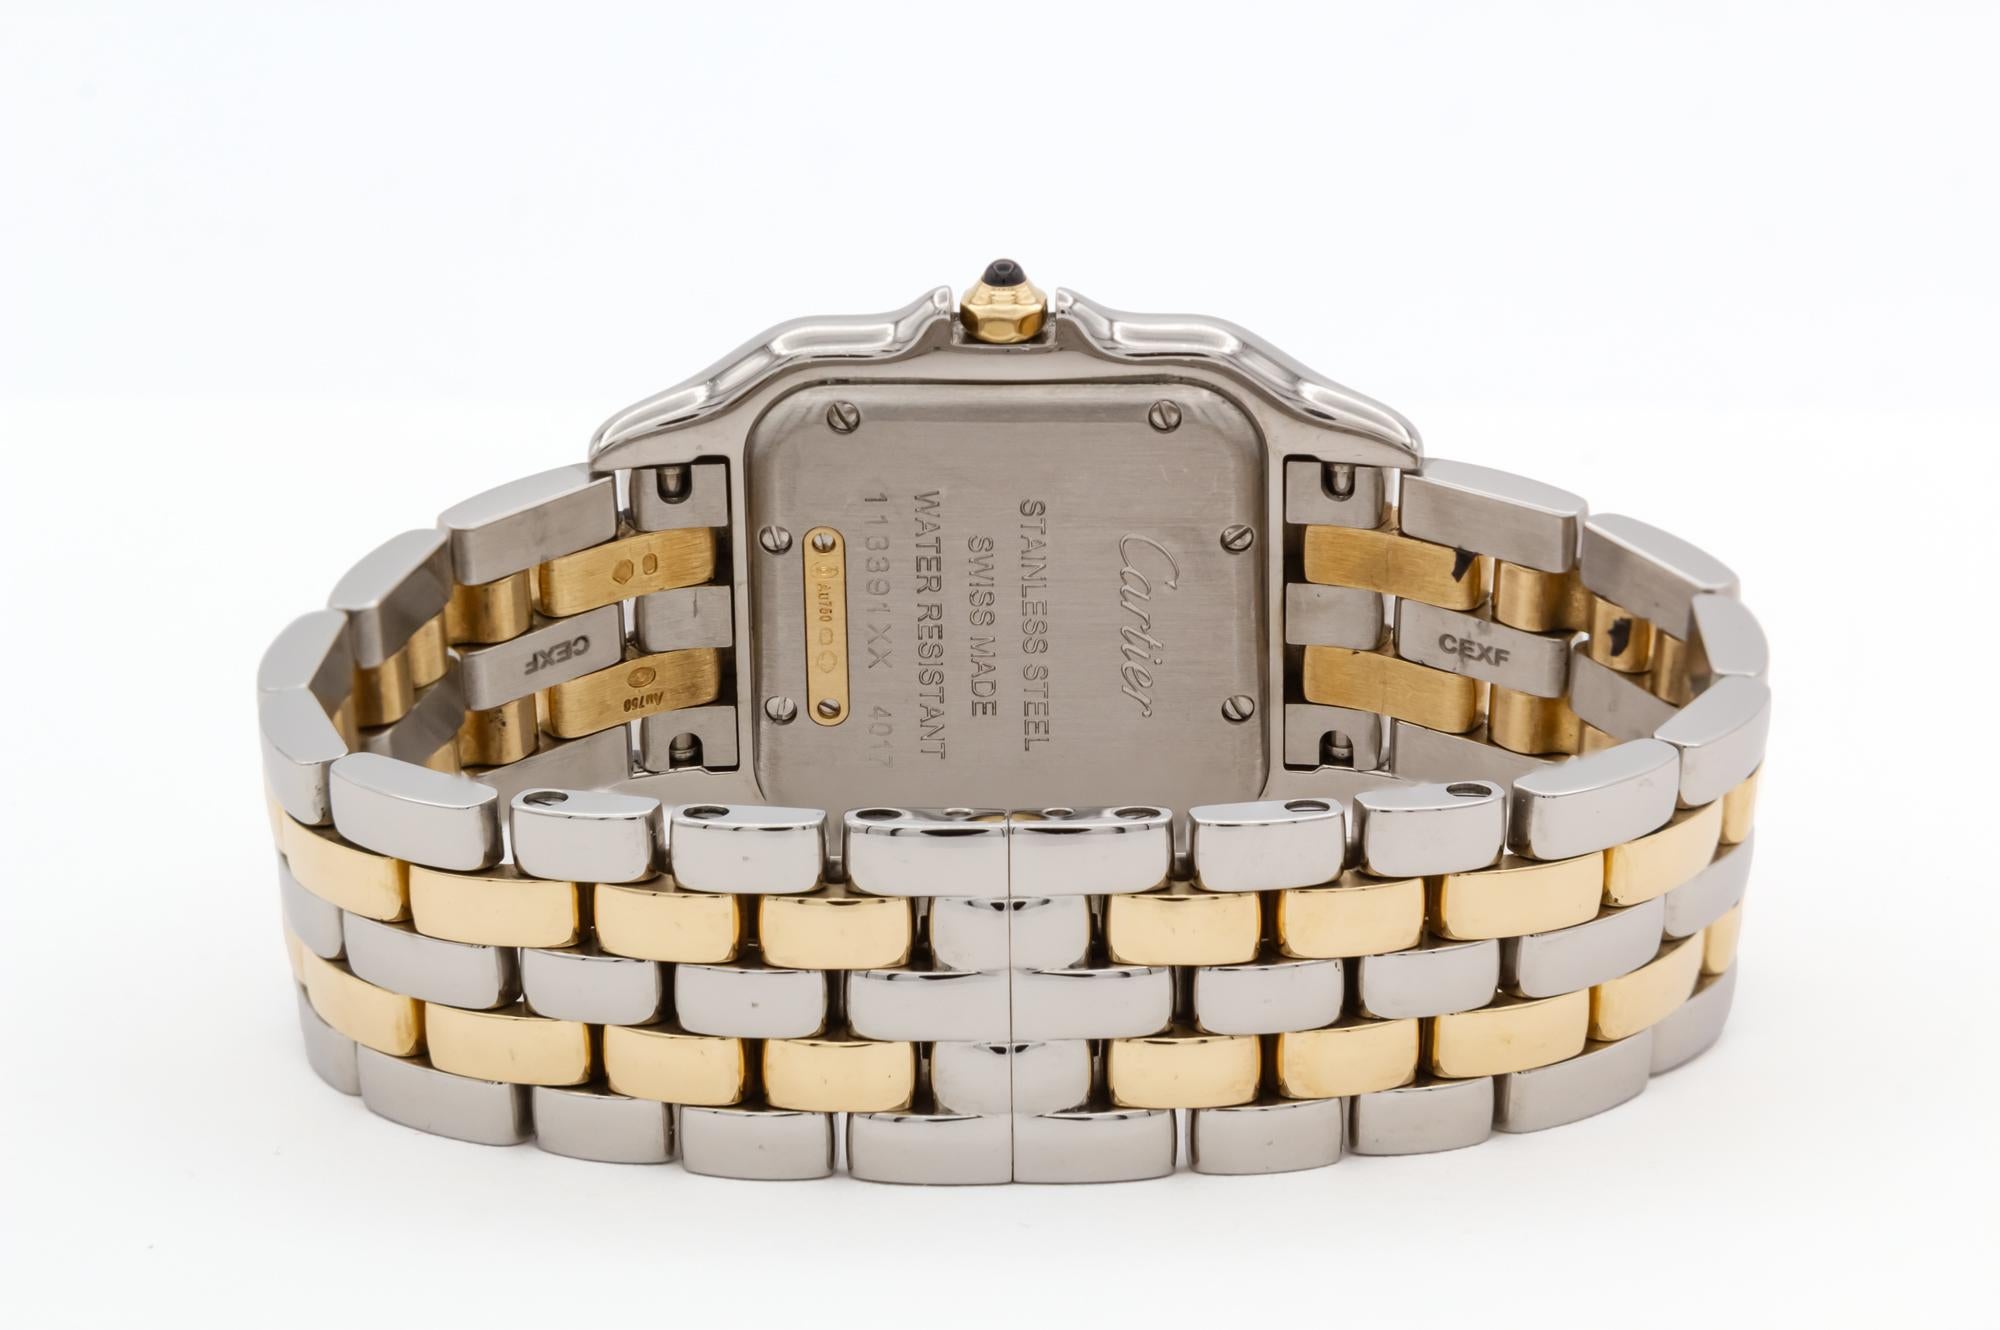 Cartier Panthere De Cartier Medium 18K Yellow Gold & Steel Quartz Watch 4017 In Excellent Condition For Sale In Tustin, CA